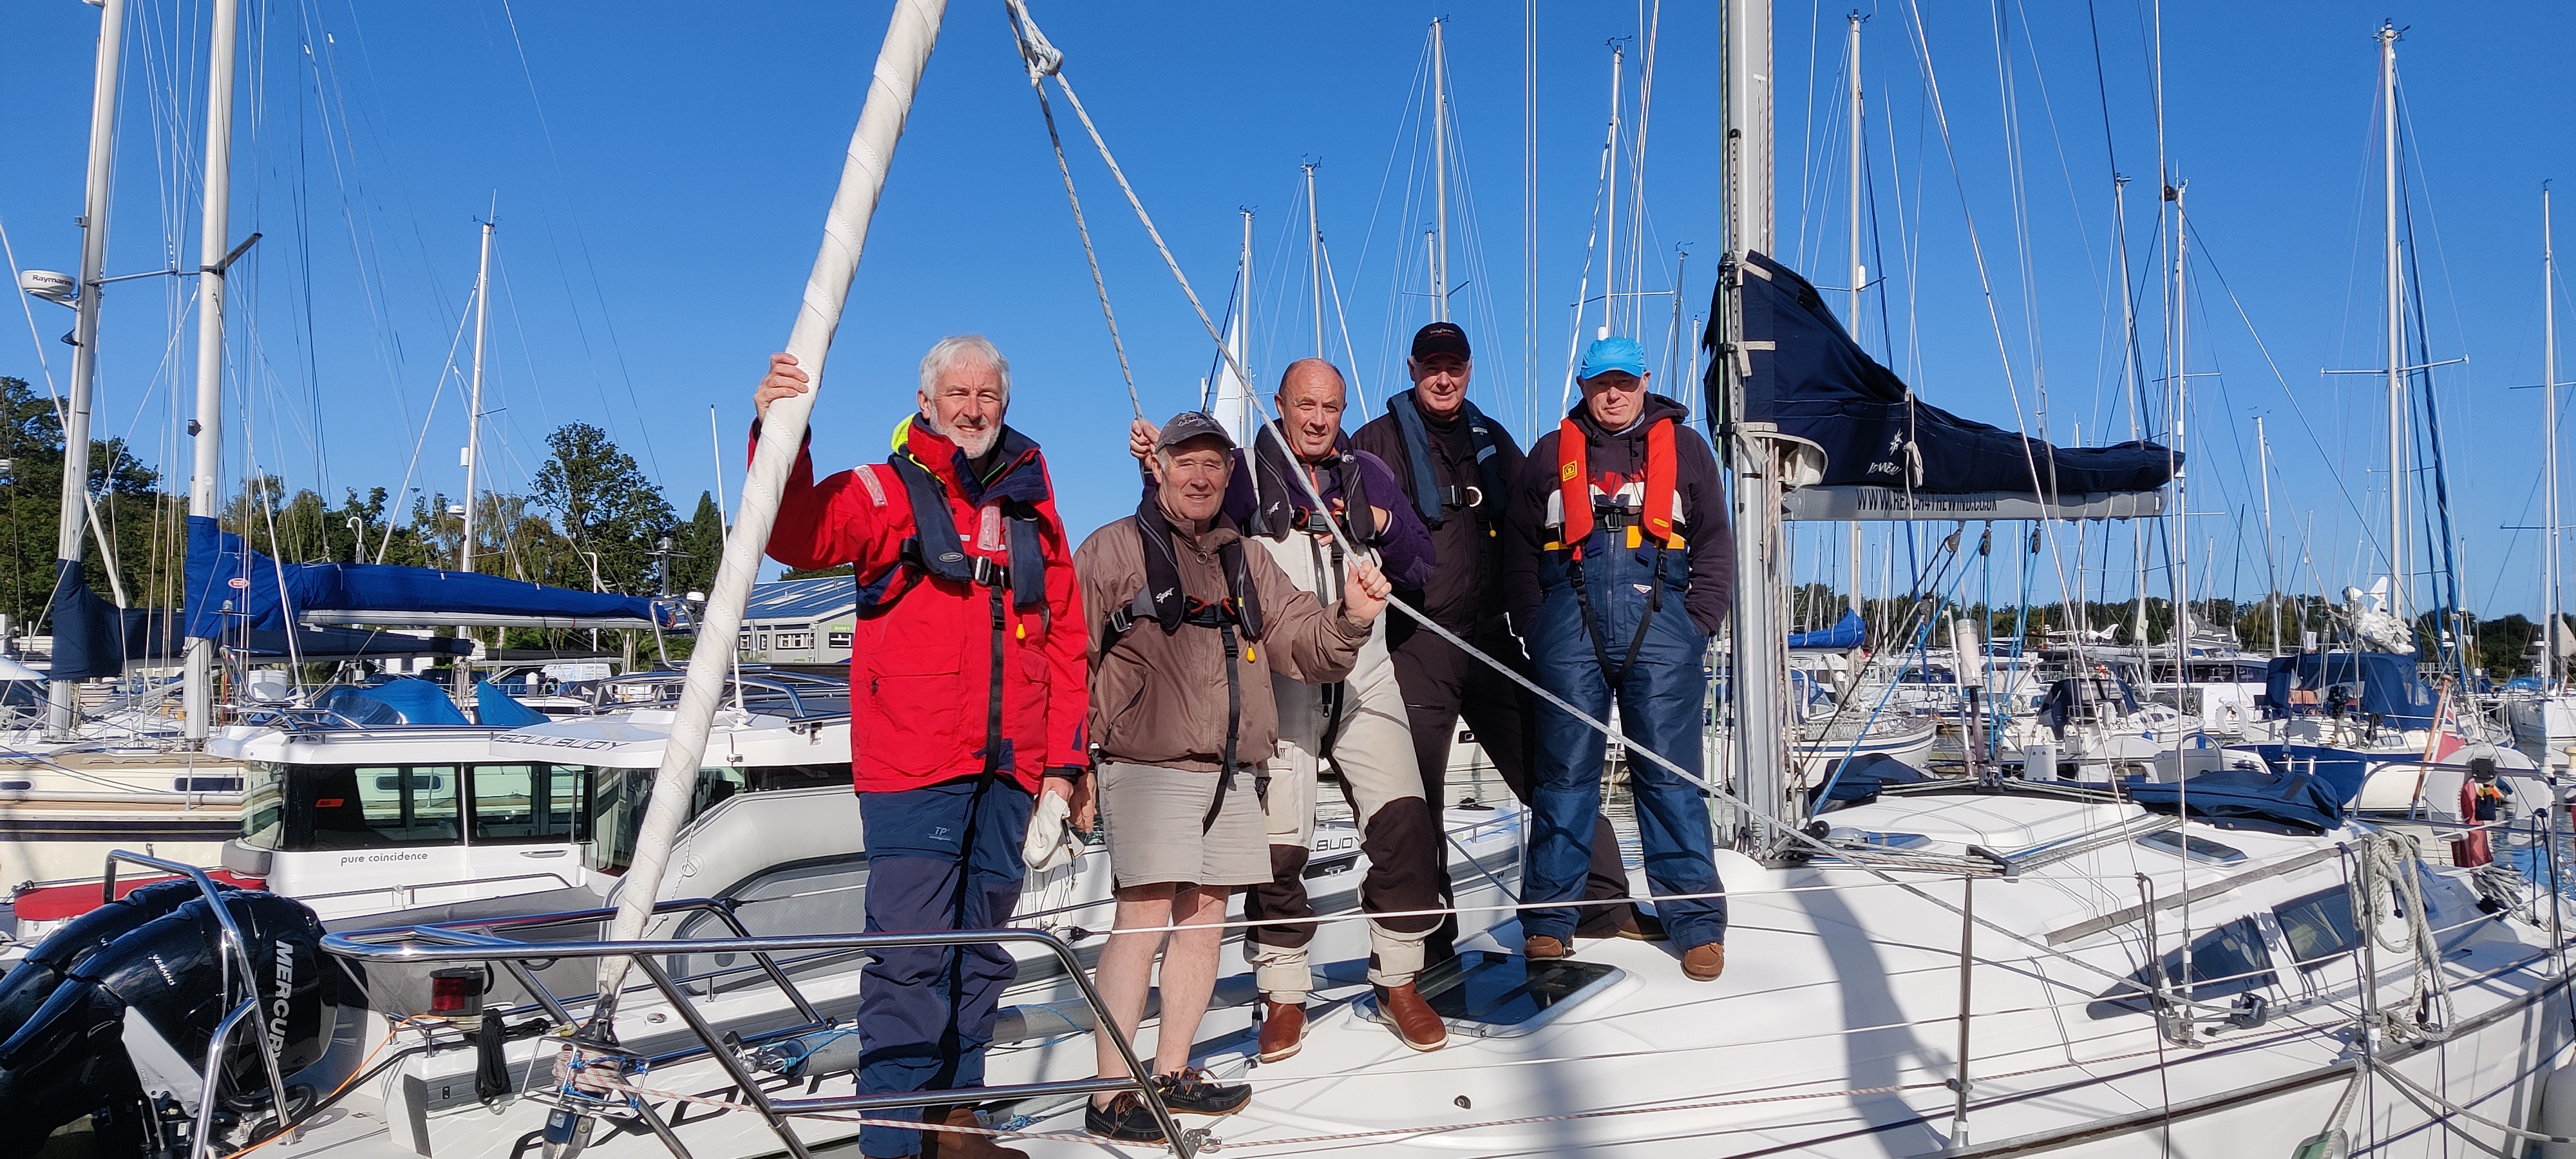 Skippers from Midlands cruising clubs on a training weekend in the Solent, credit HOEOCA